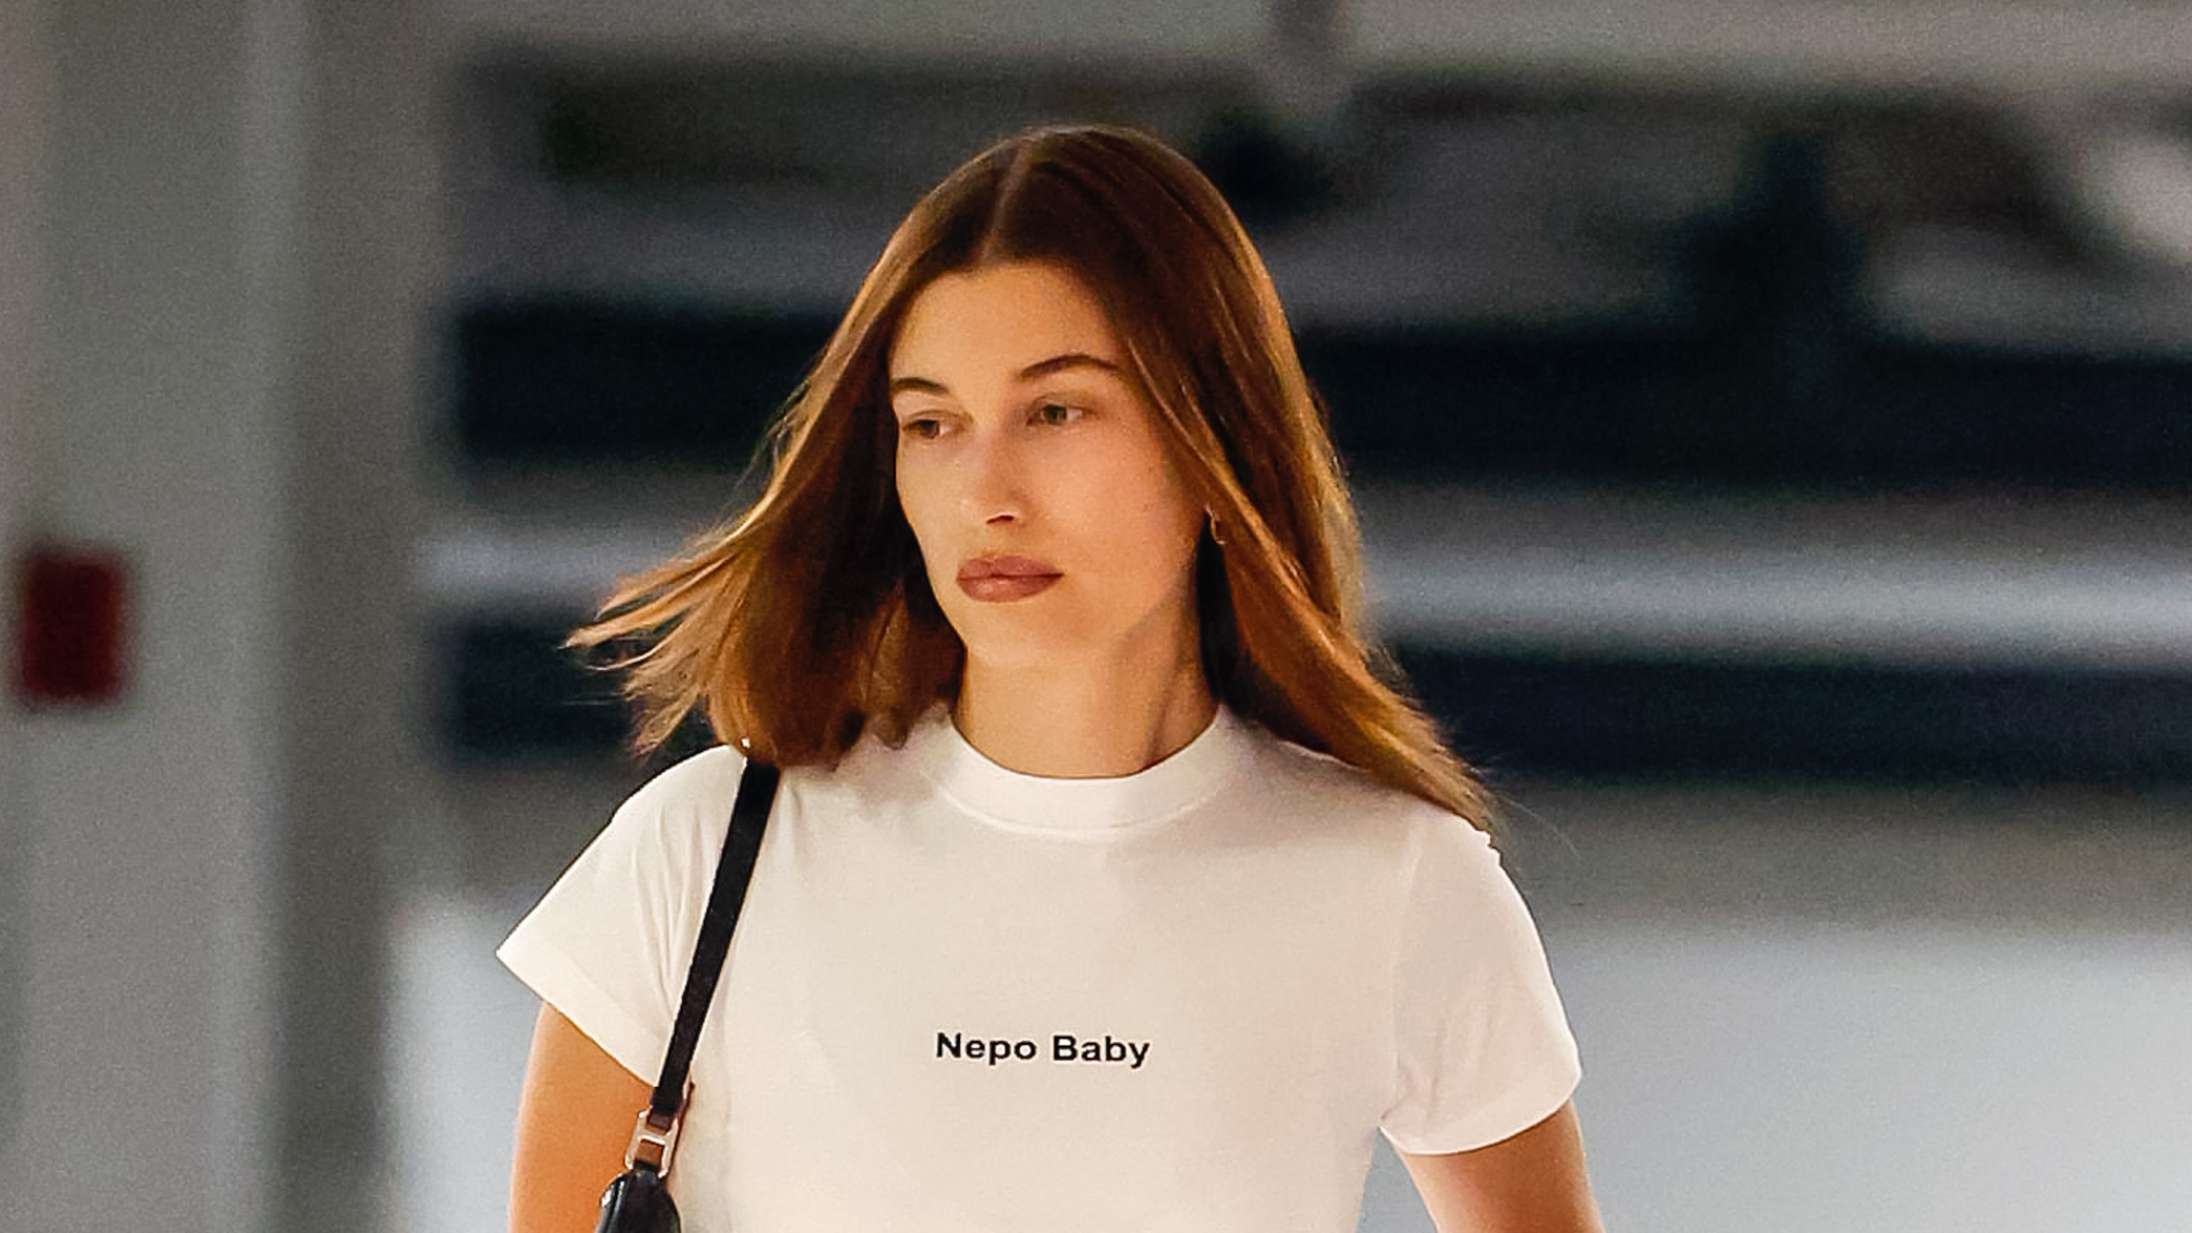 Hailey Bieber hagles ned efter ‘Nepo Baby’ t-shirt